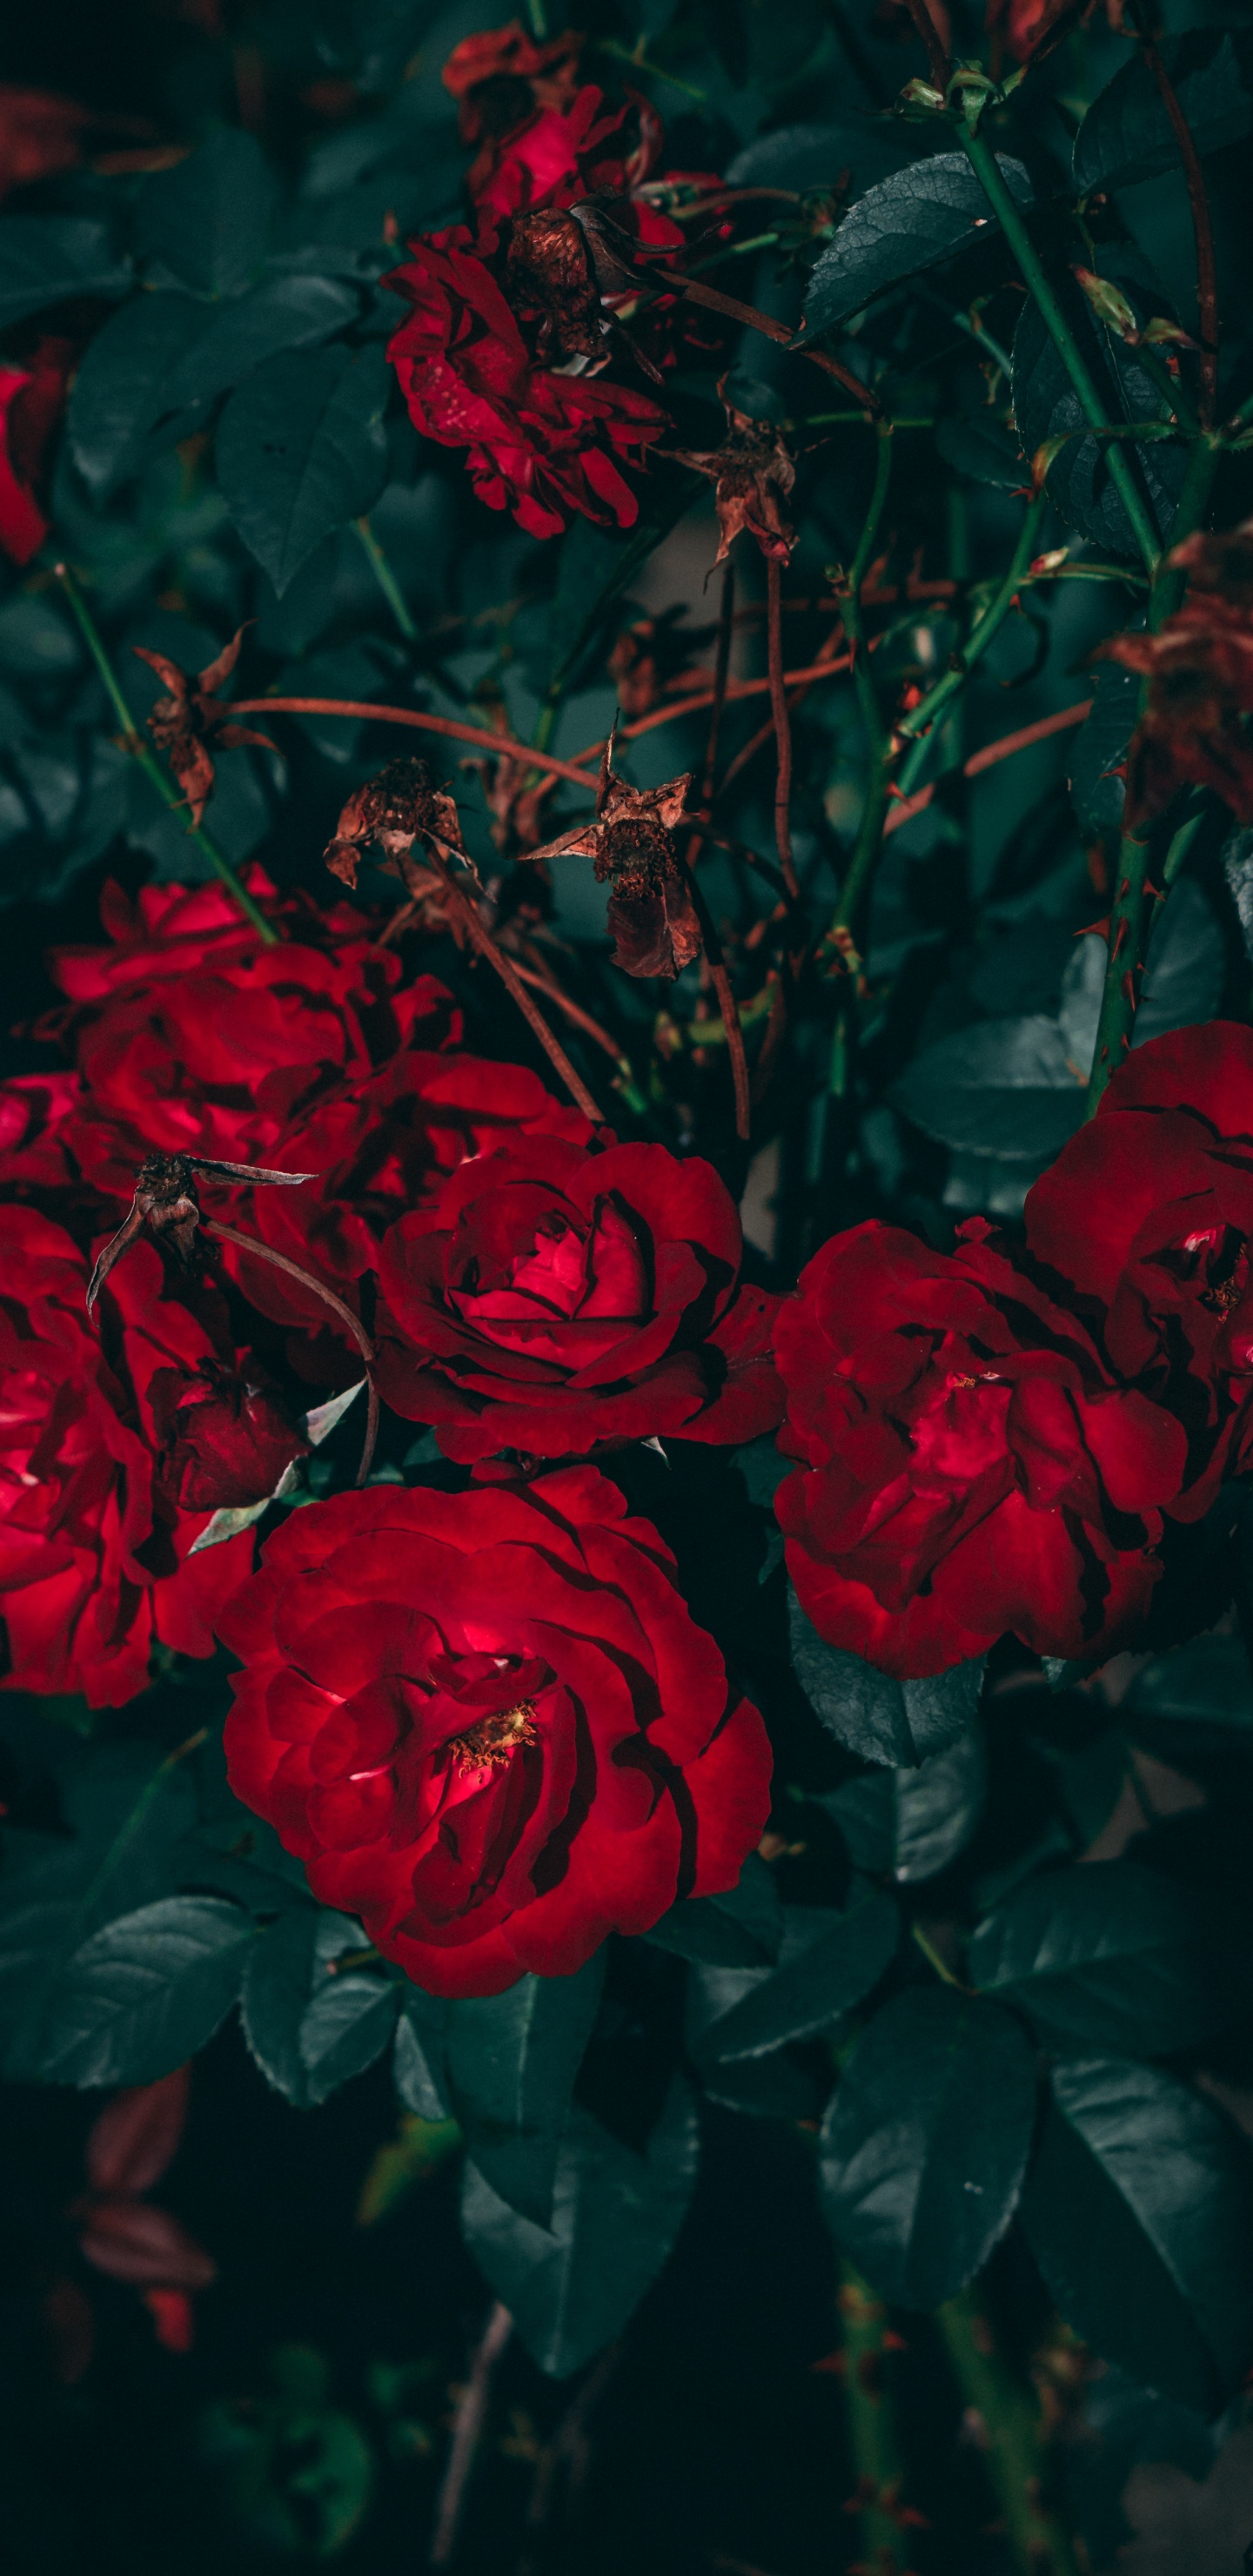 Roses Rouges en Photographie Rapprochée. Wallpaper in 1440x2960 Resolution